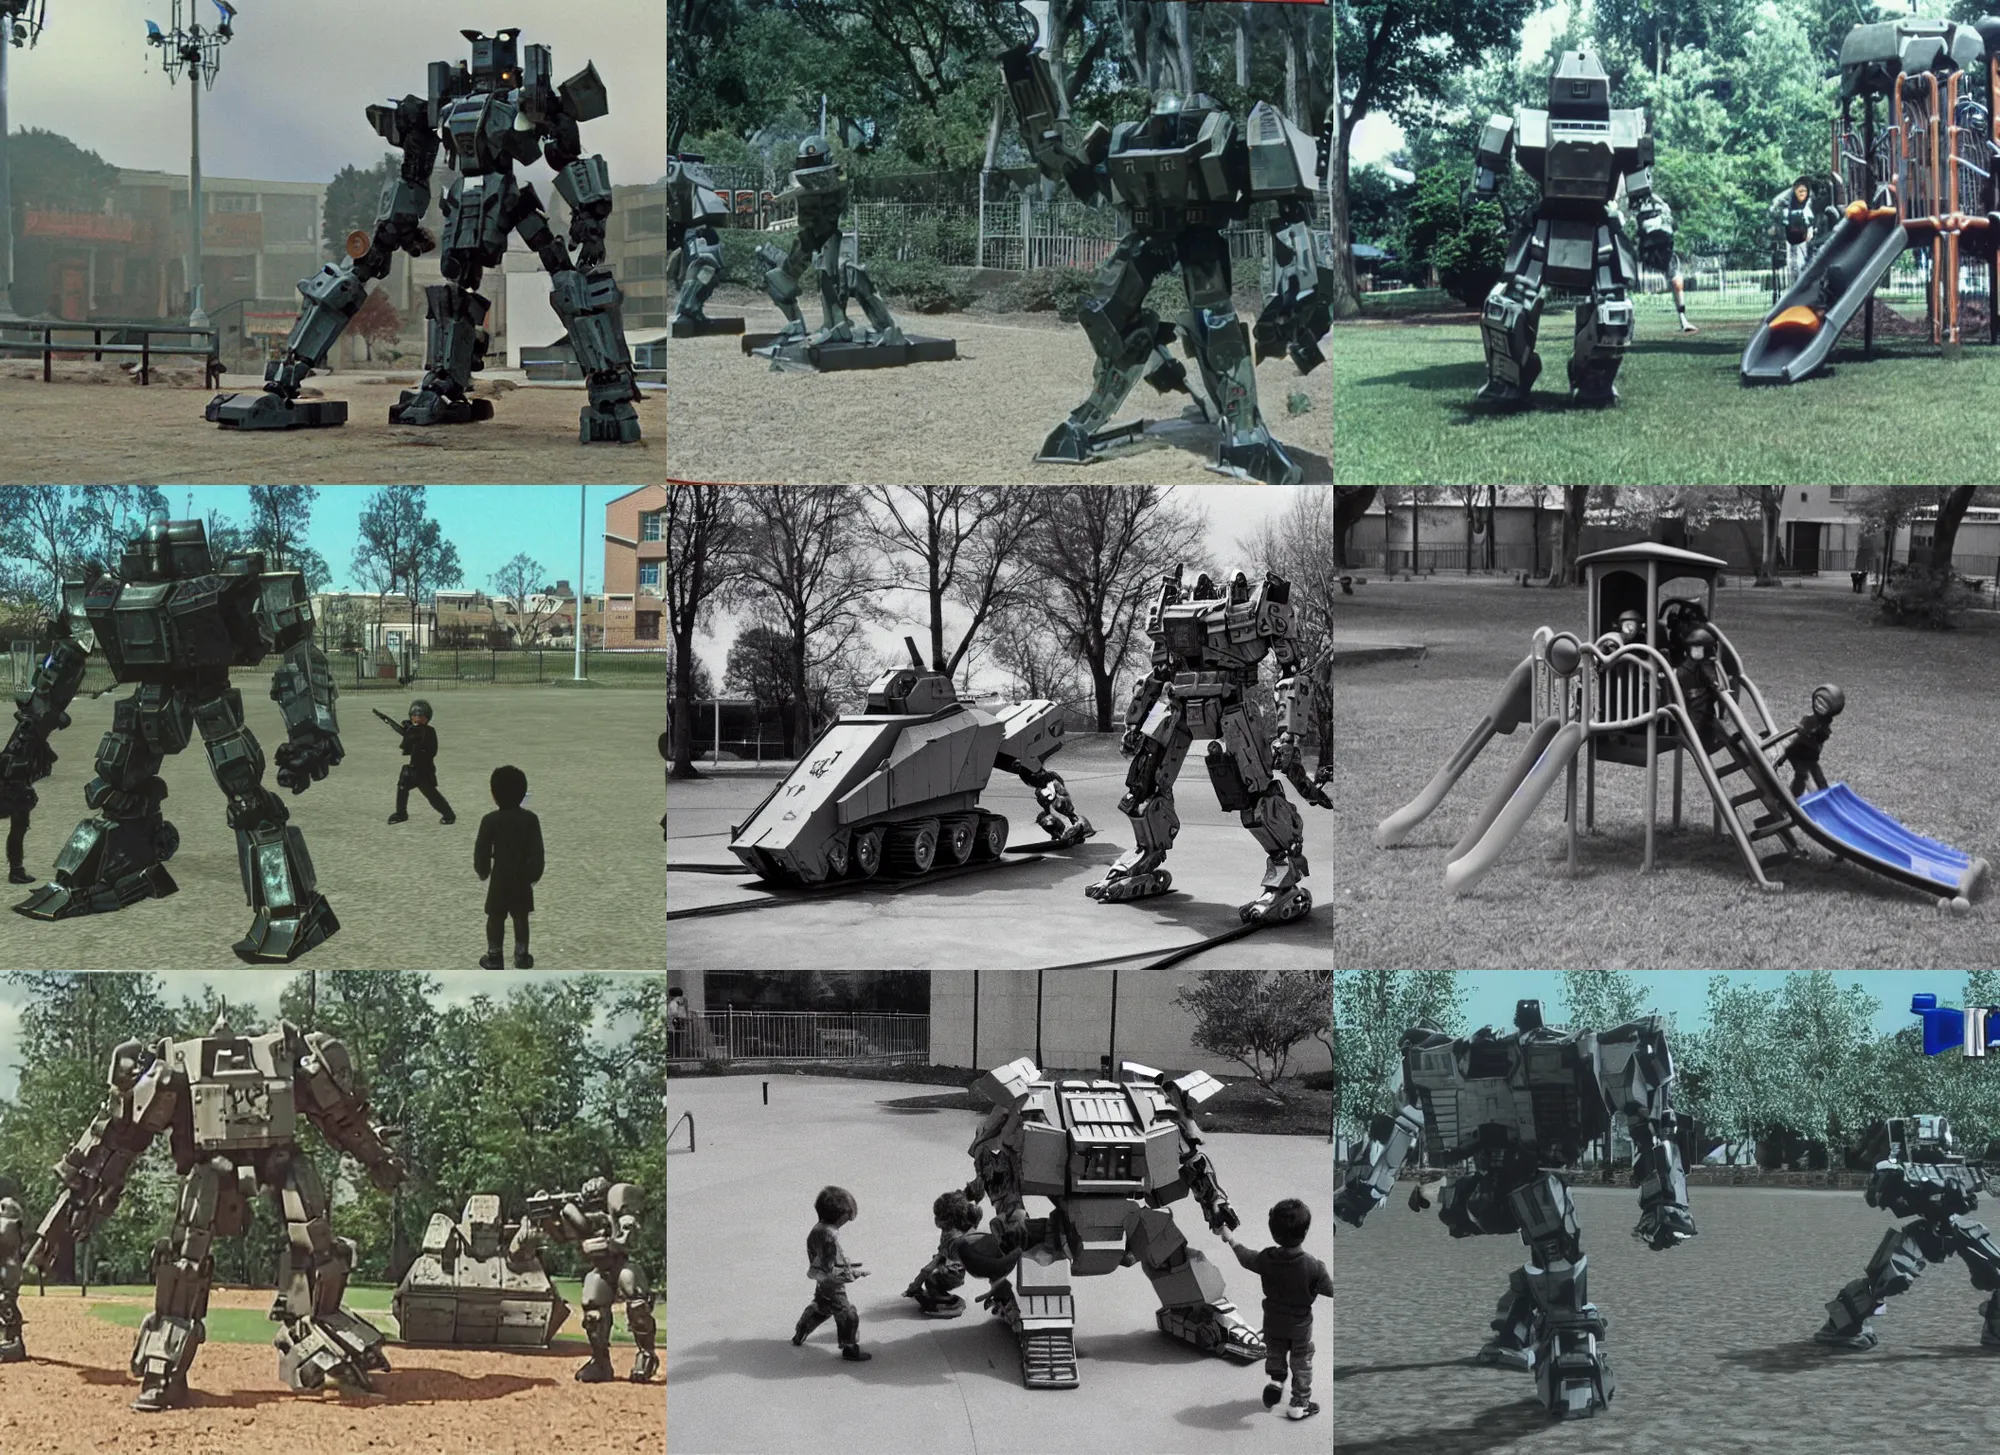 Prompt: home video footage, an armored core playing in the playground, 1 9 9 0